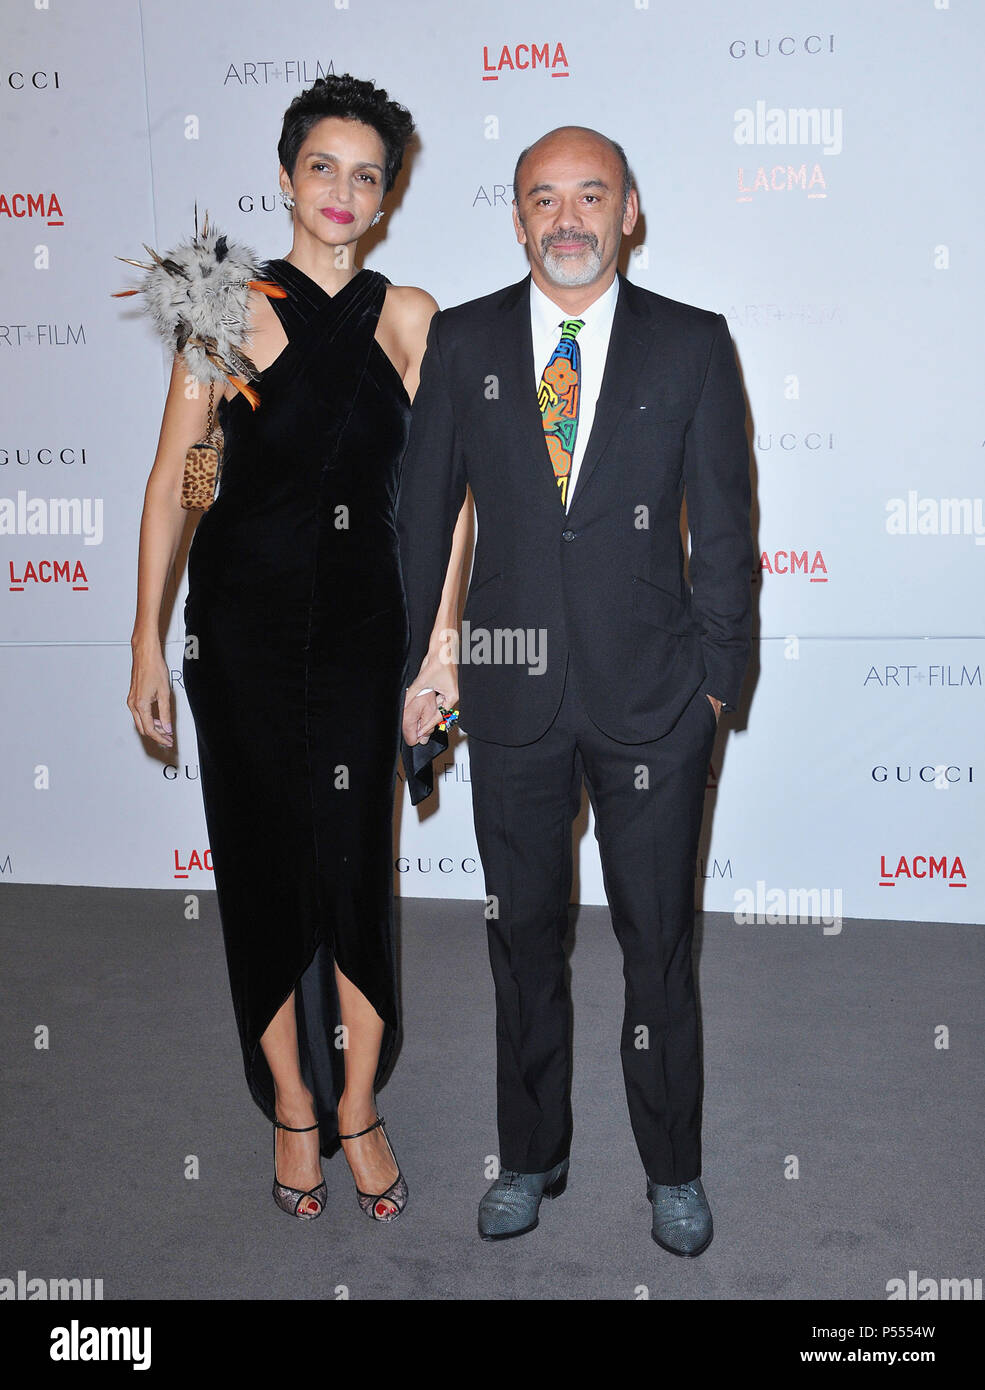 Christian Louboutin shares his cultural picks from books to music